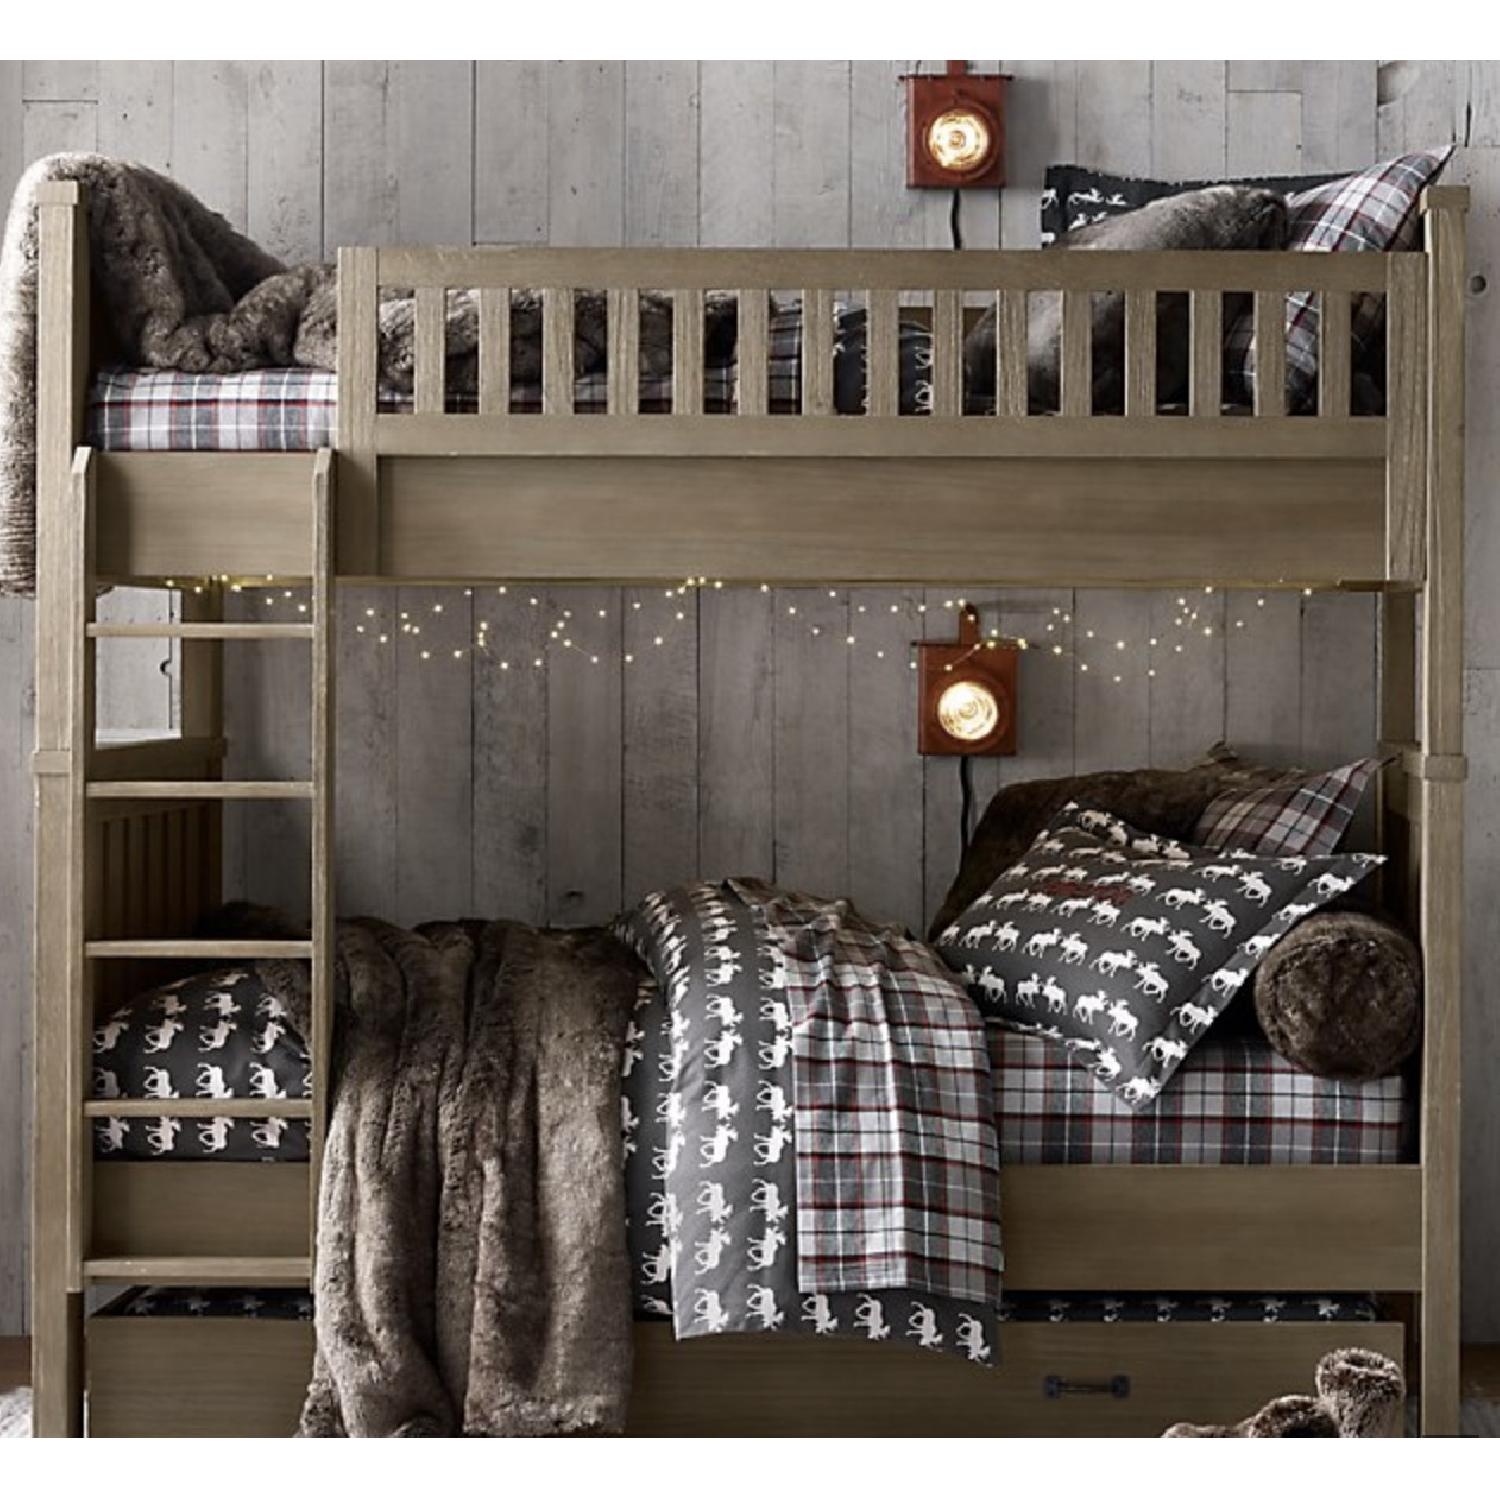 Classic bunk bed cozy flannel bedding the perfect wintry retreat